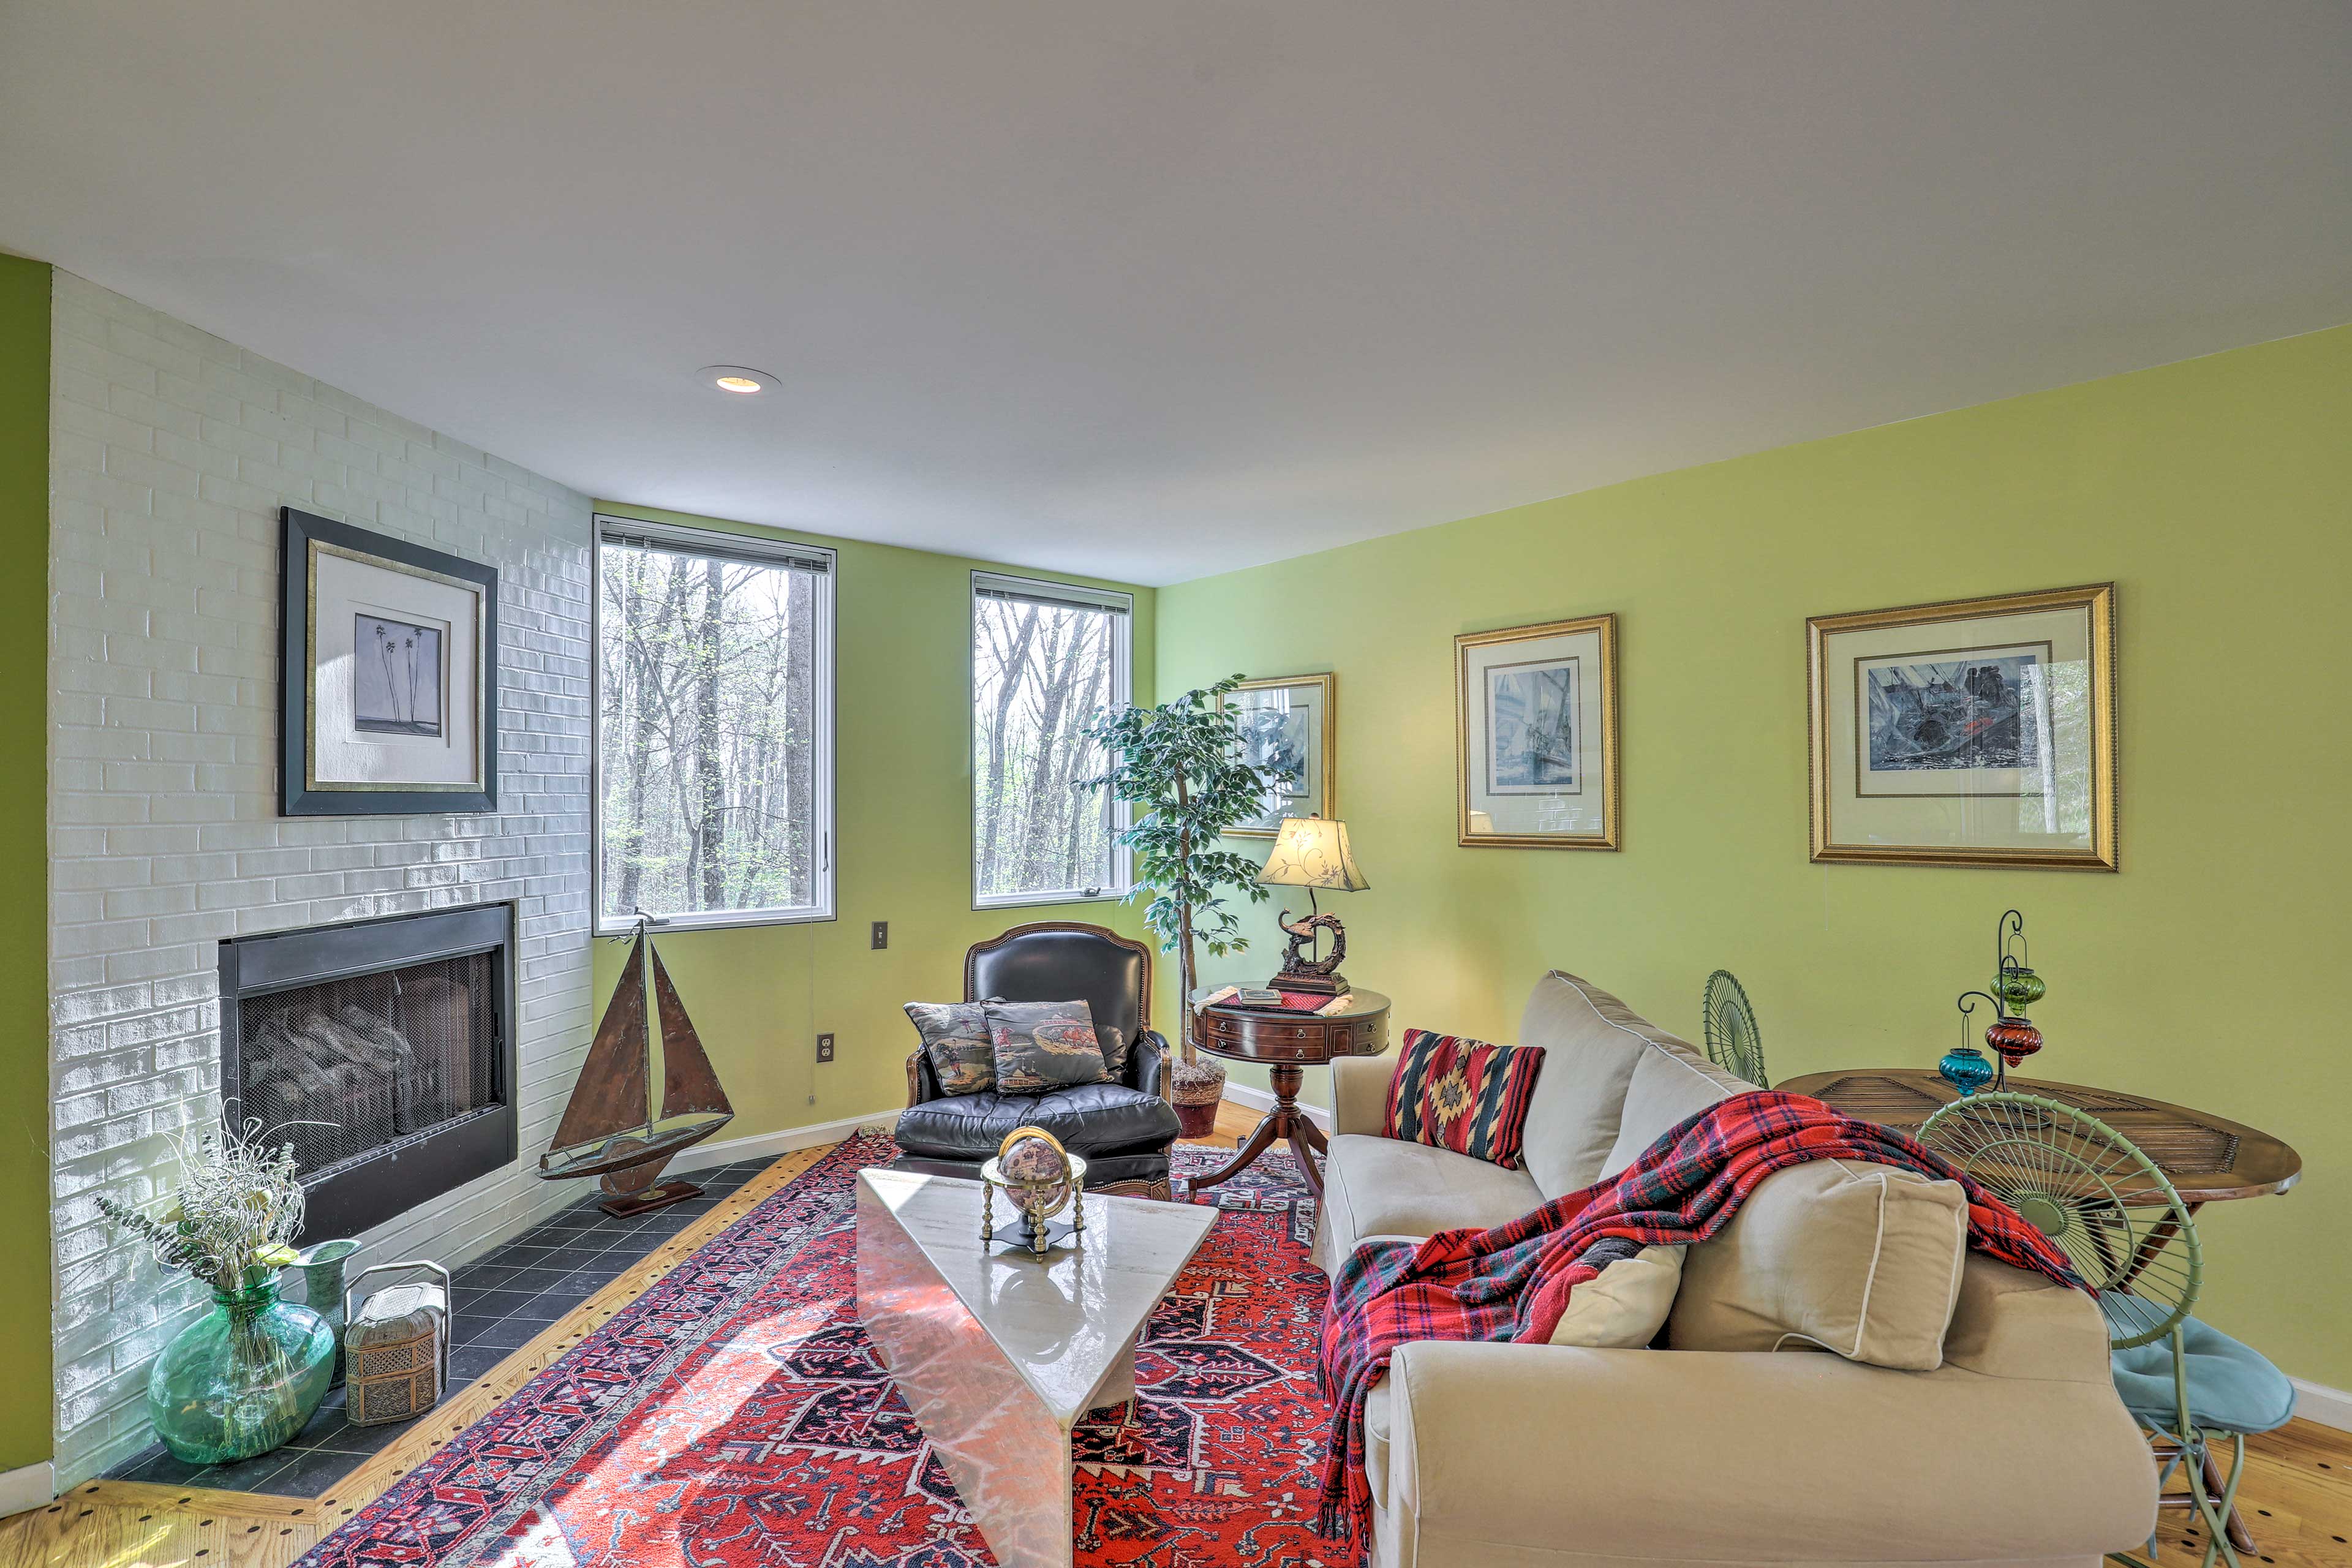 Property Image 2 - NEW! Asheville Carriage House: Hiking, Arts, Music